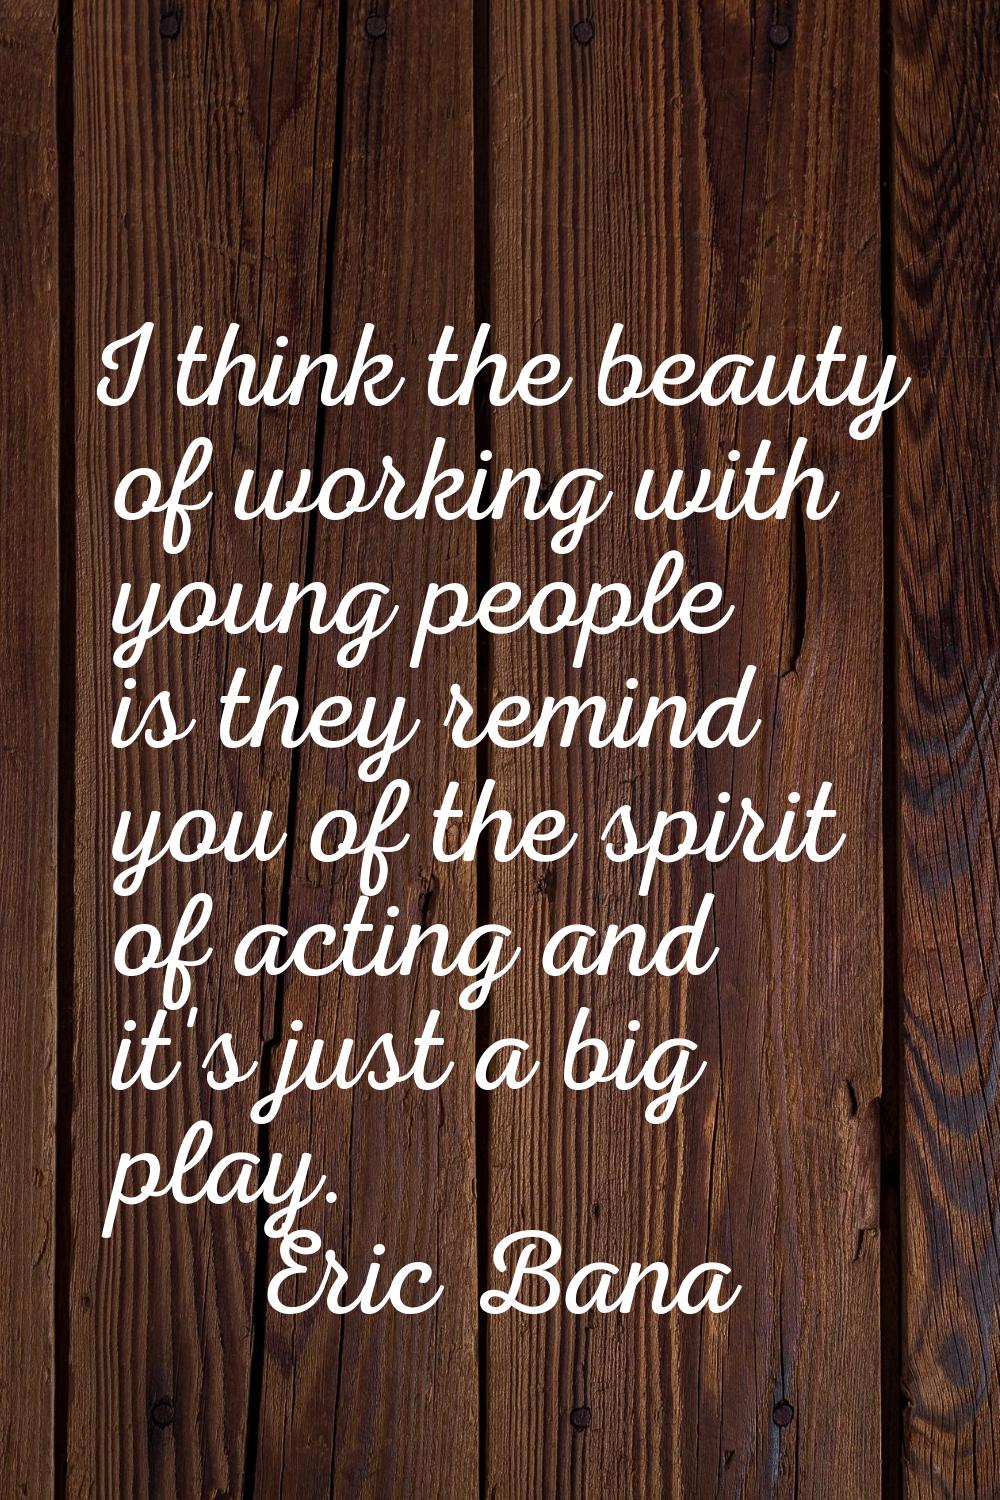 I think the beauty of working with young people is they remind you of the spirit of acting and it's